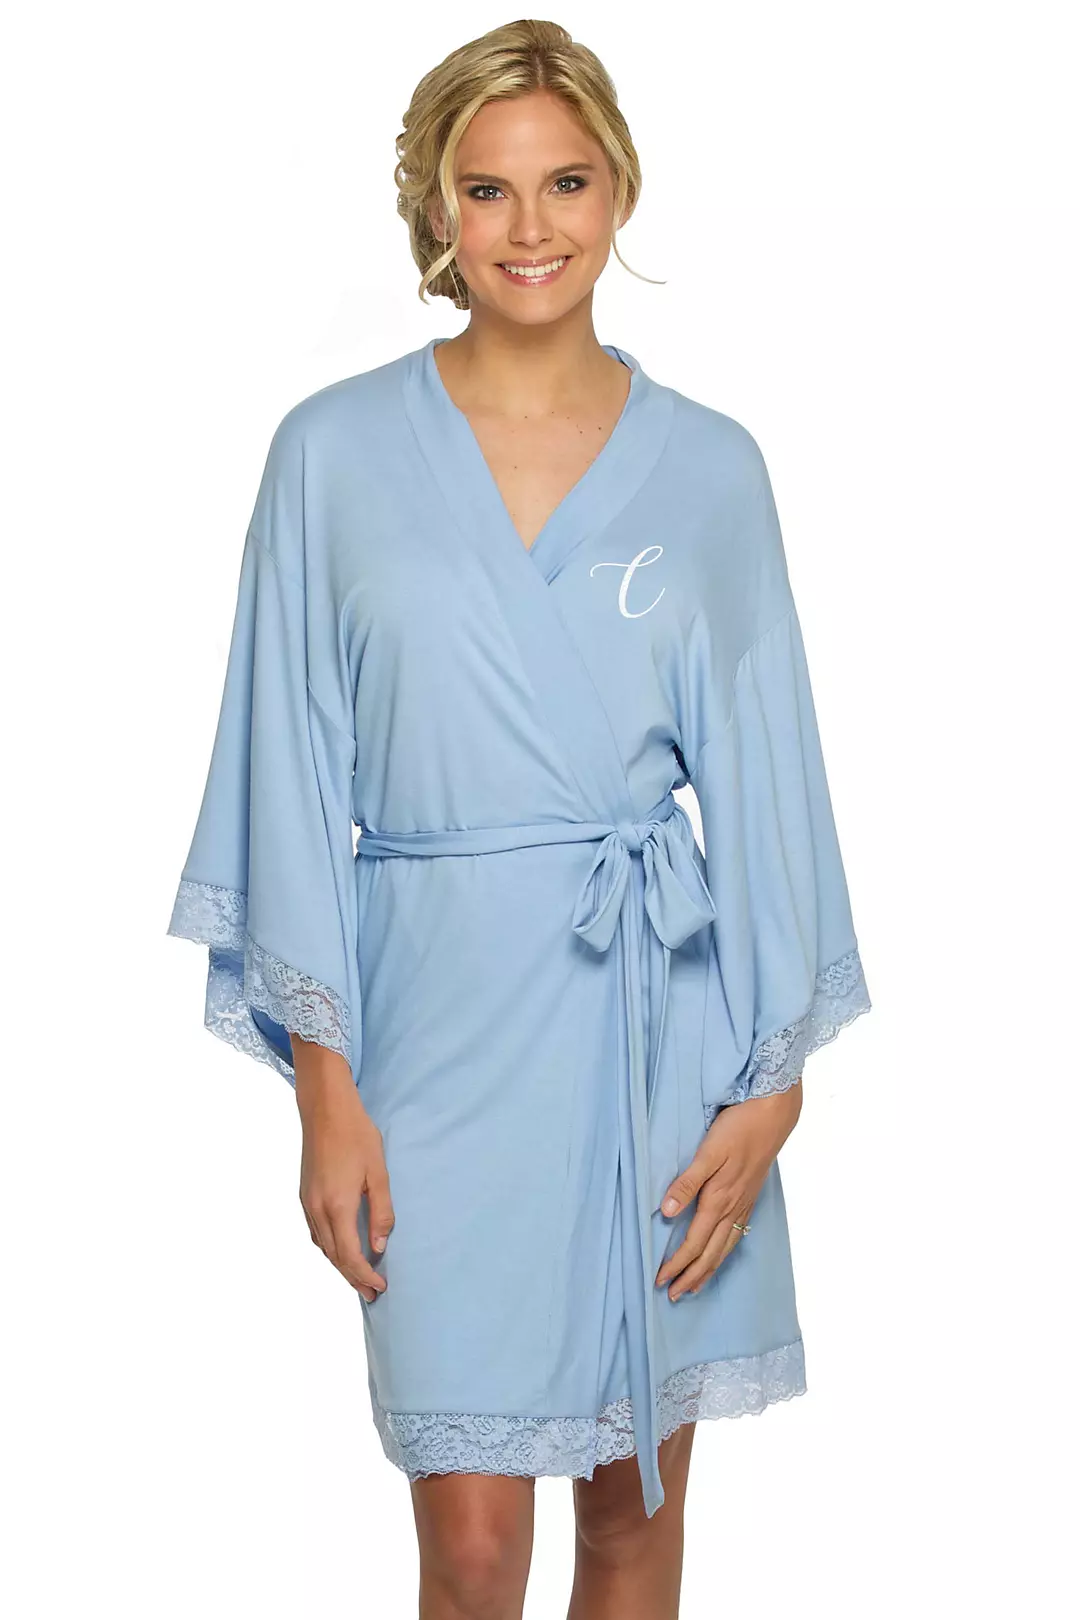 Personalized Jersey Robe with Lace Image 2